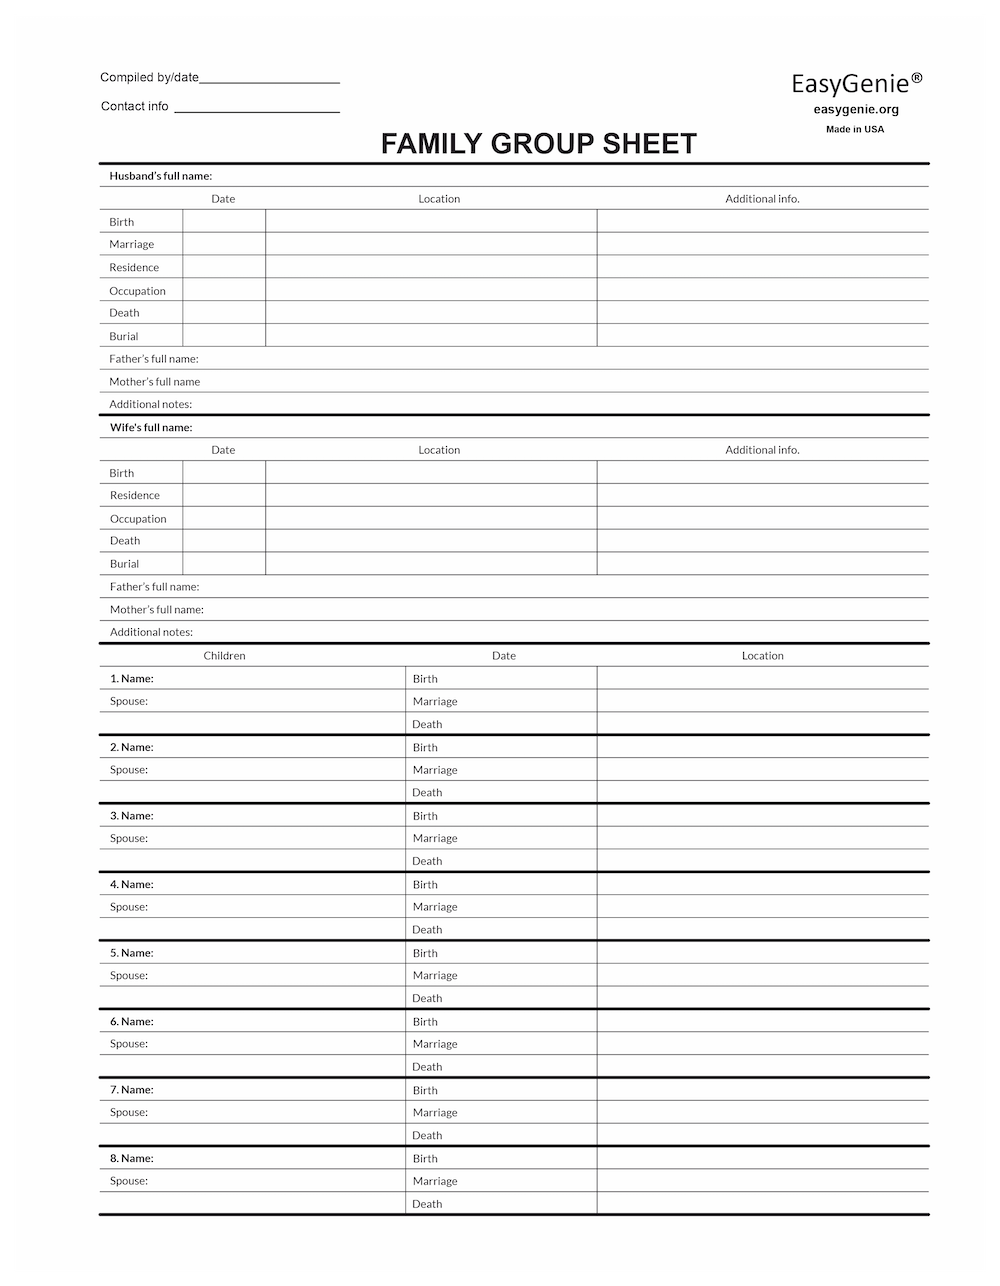 easygenie-blank-two-sided-family-group-sheets-for-genealogy-40-sheets